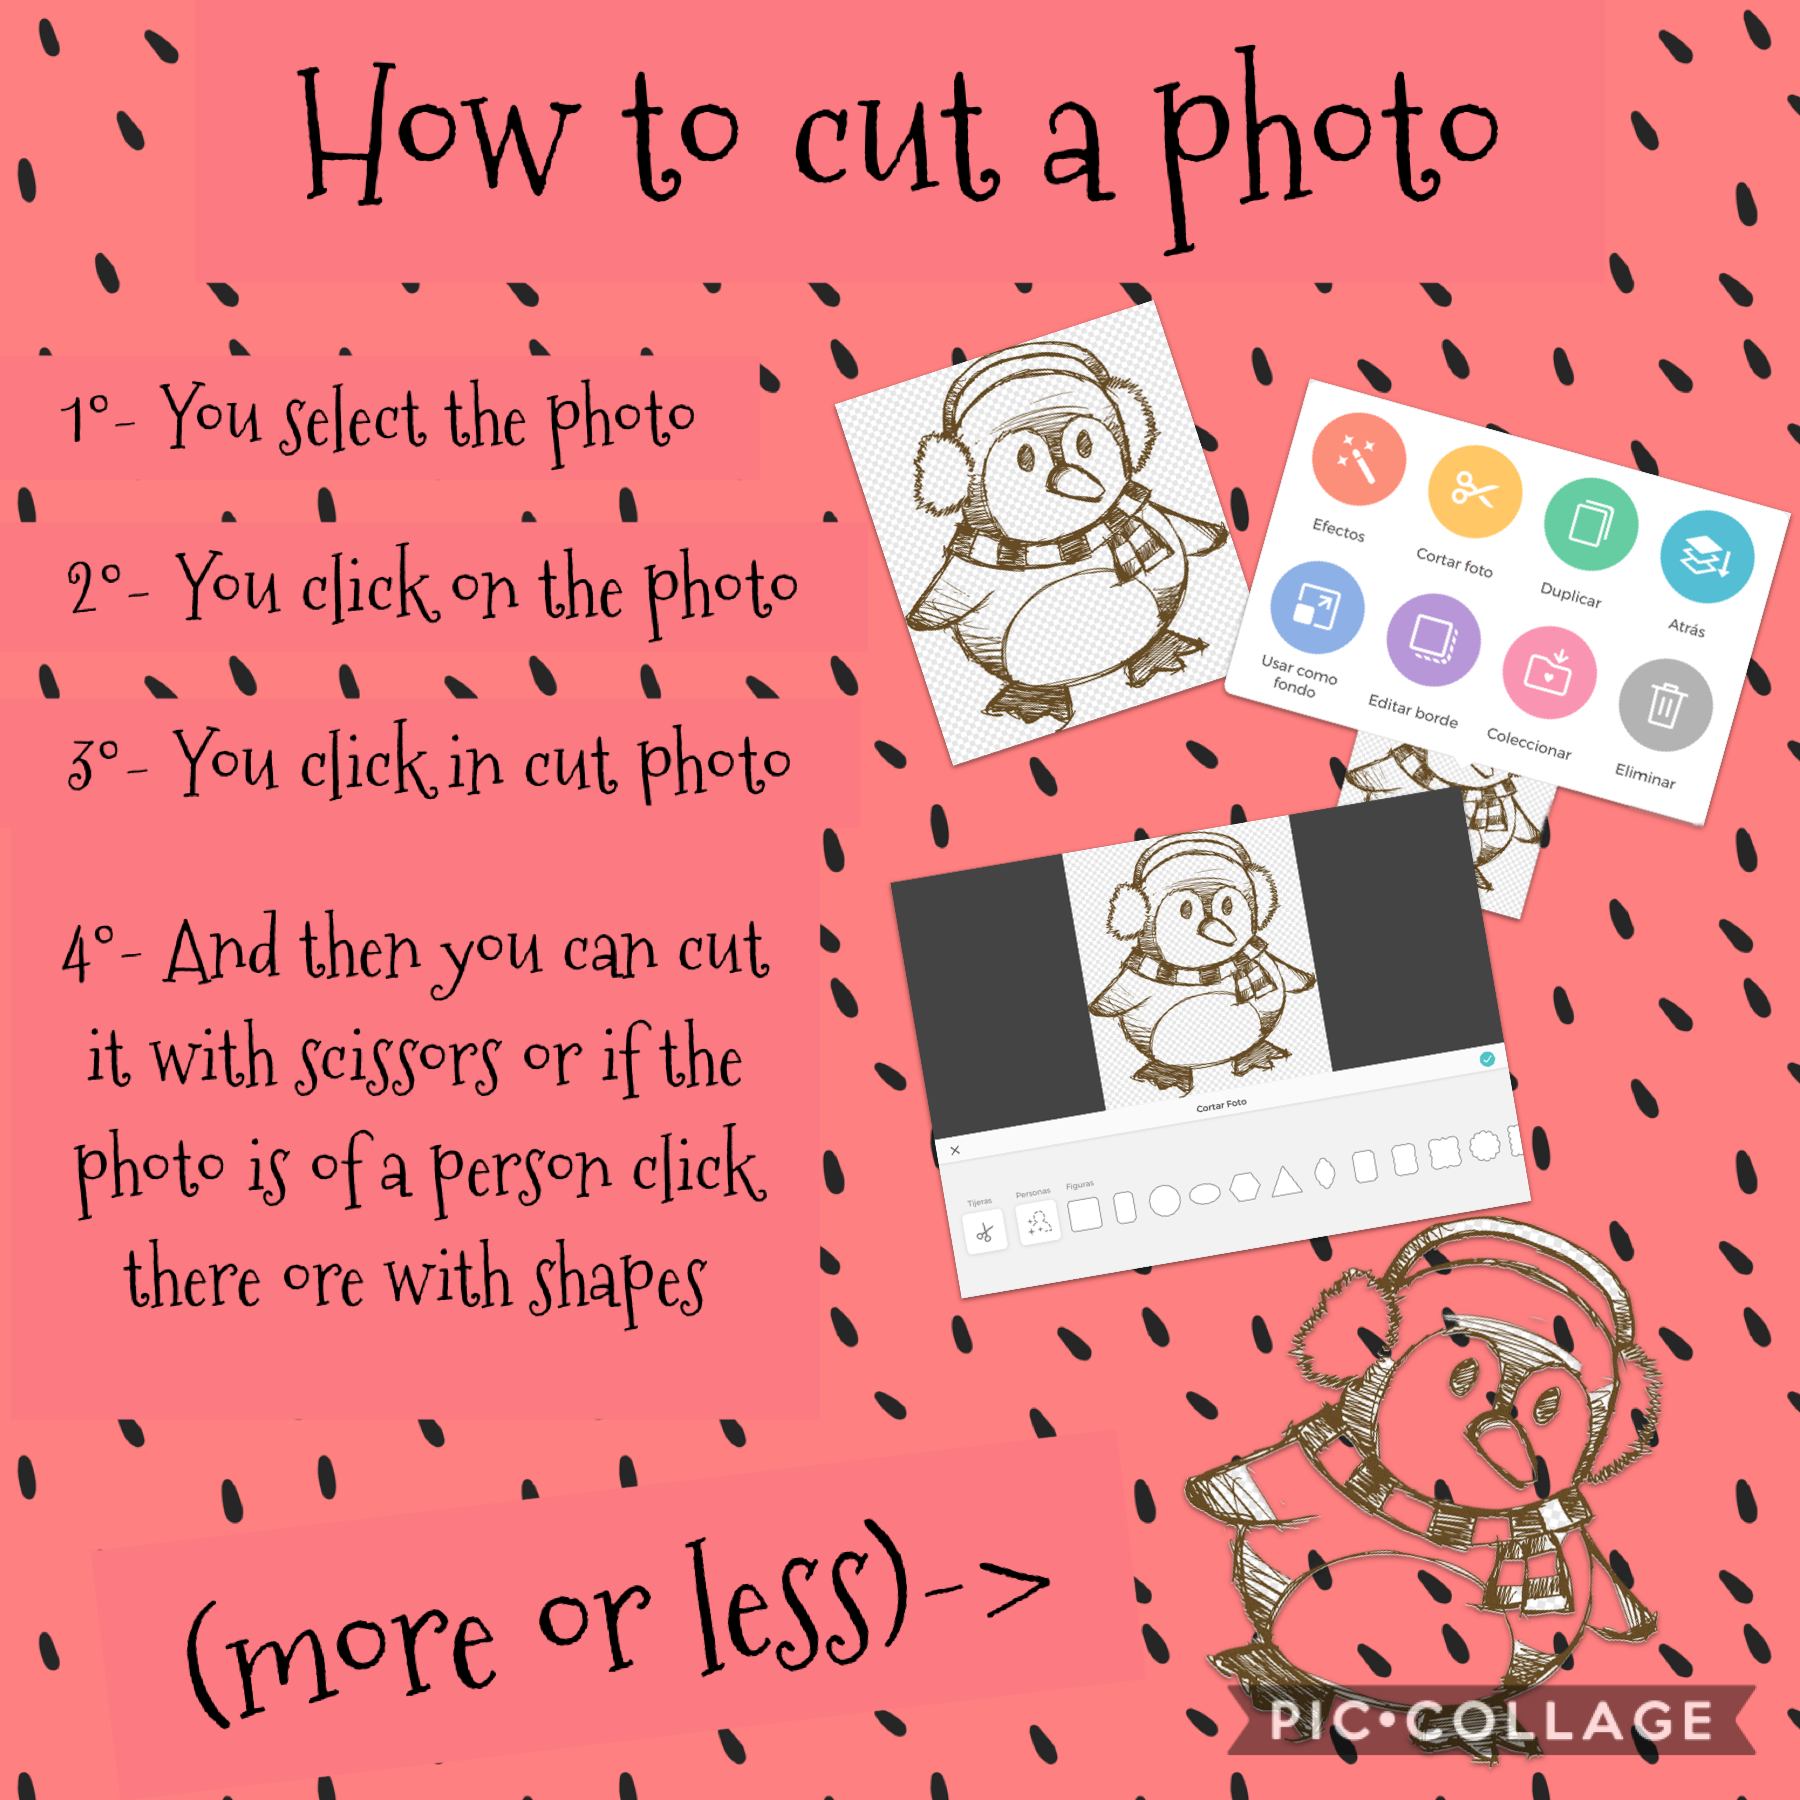 How to cut a photo